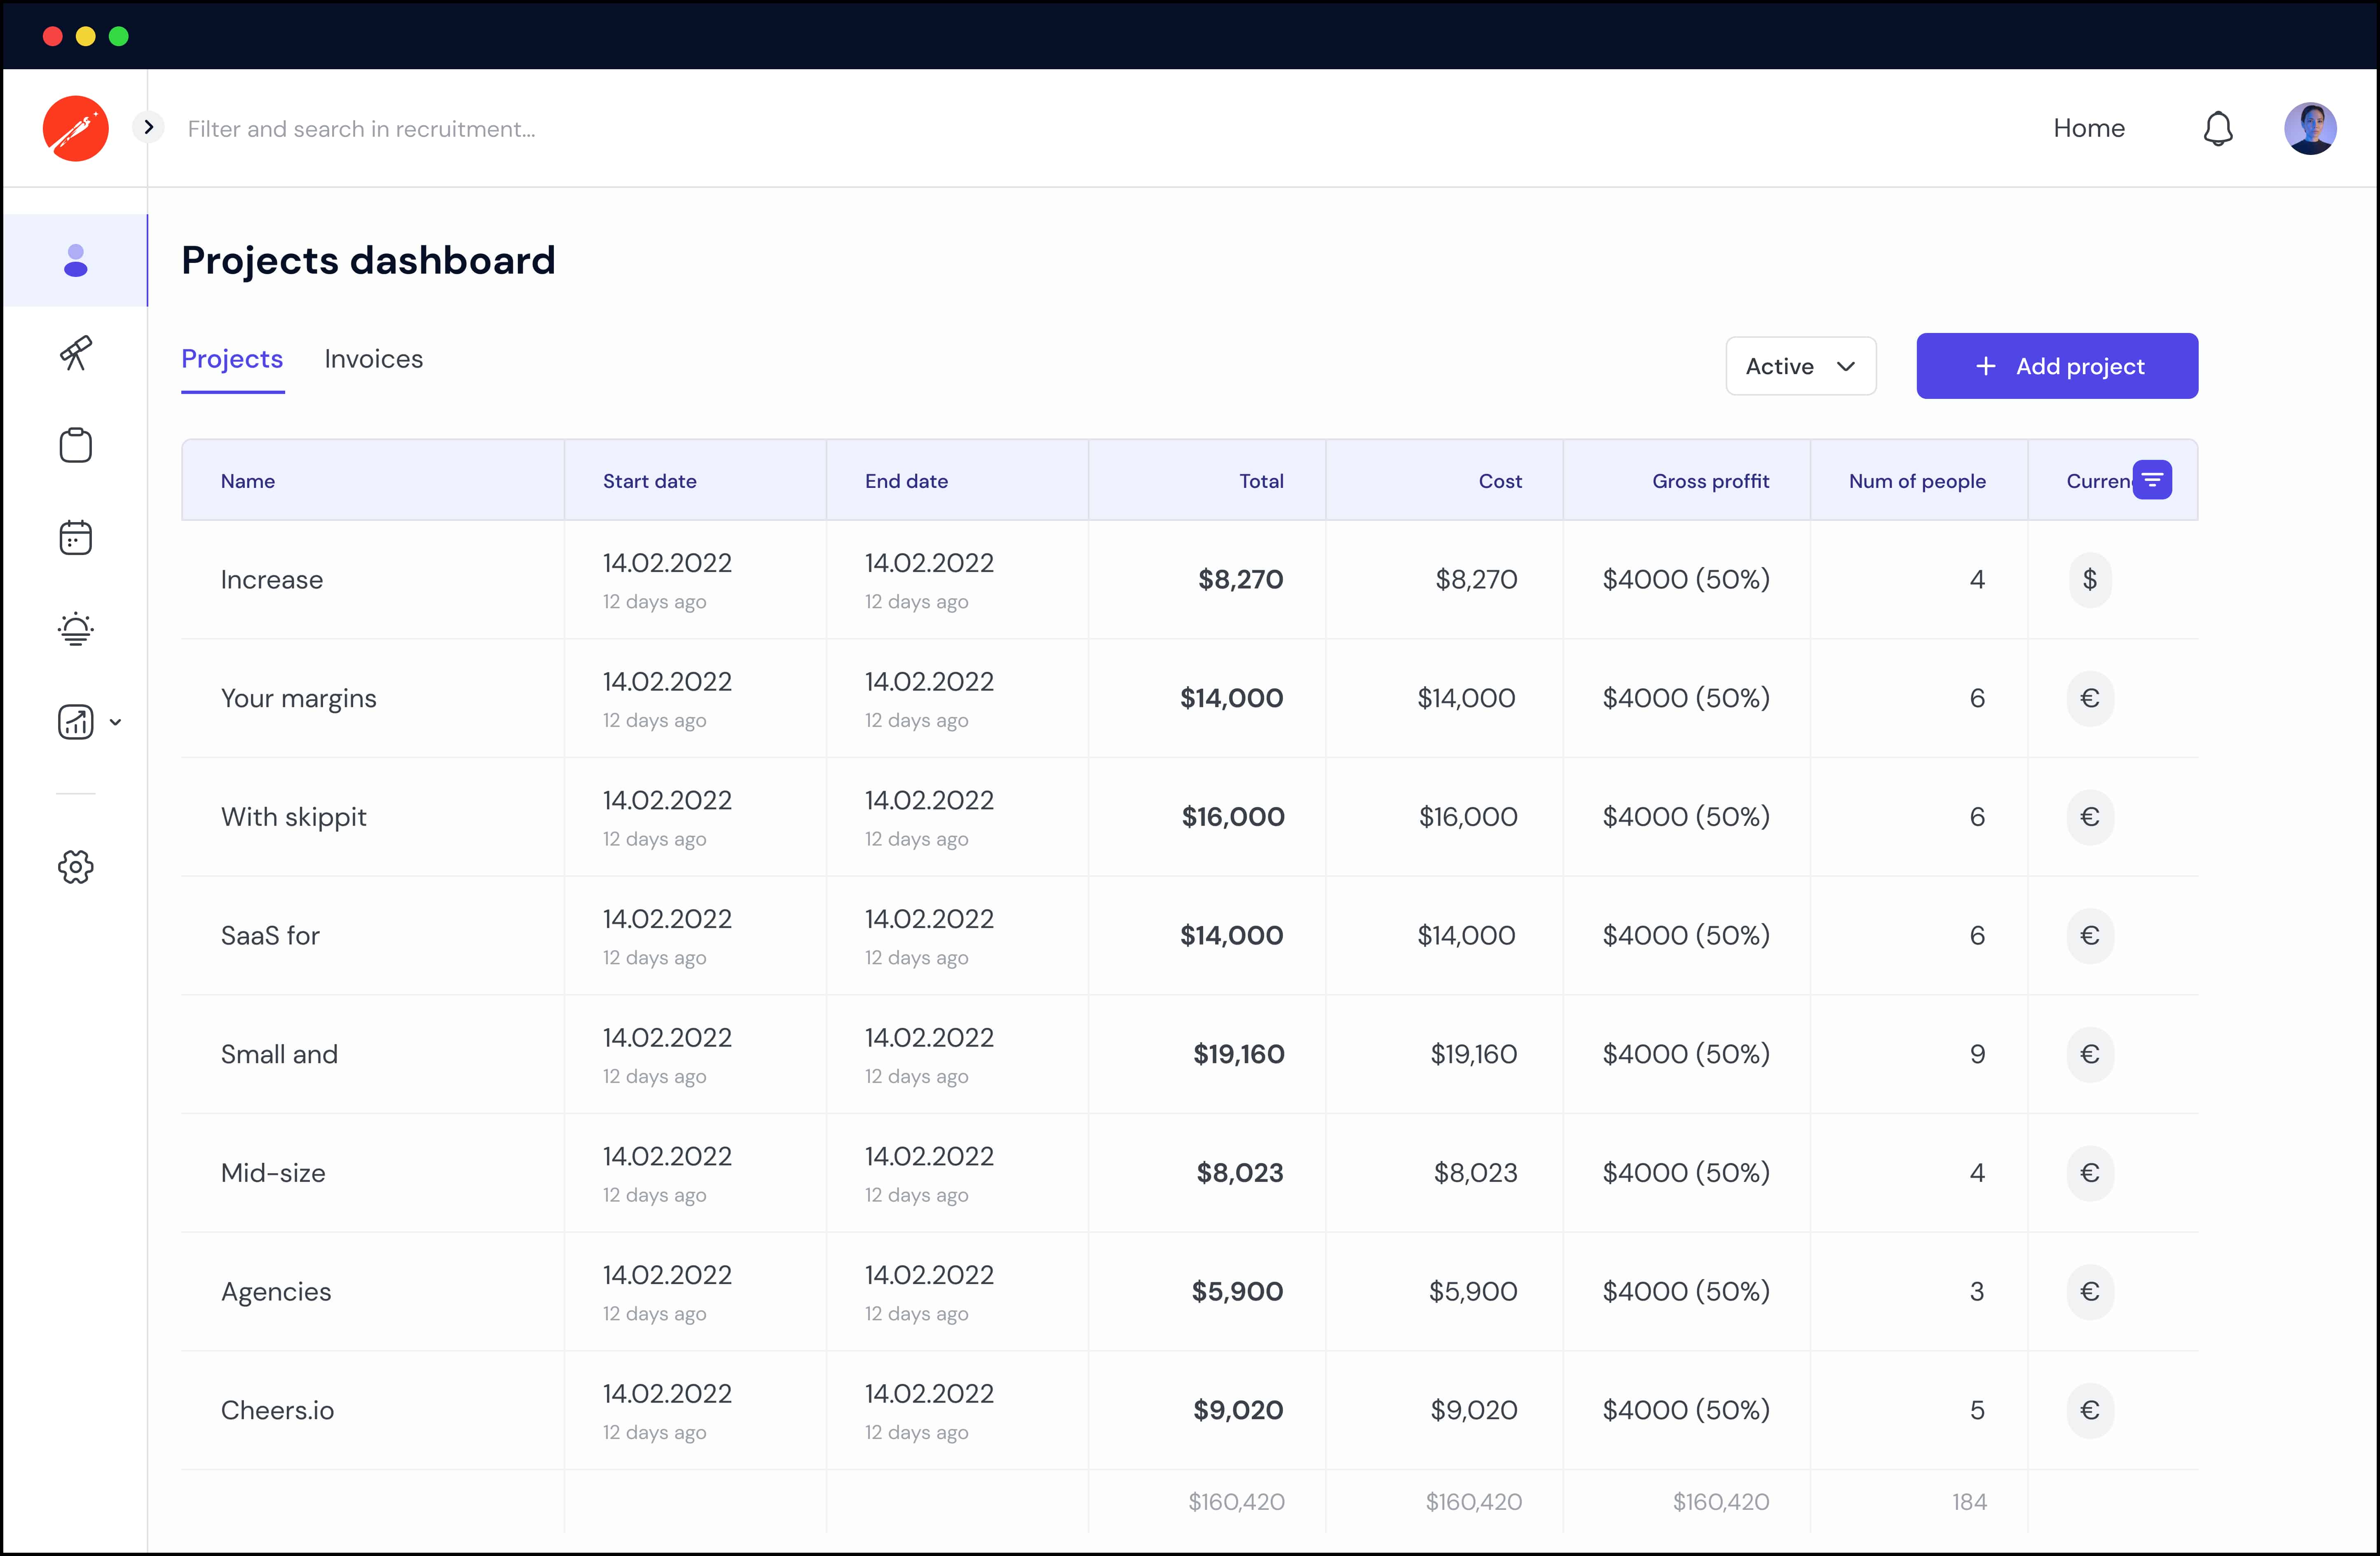 Projects dashboard